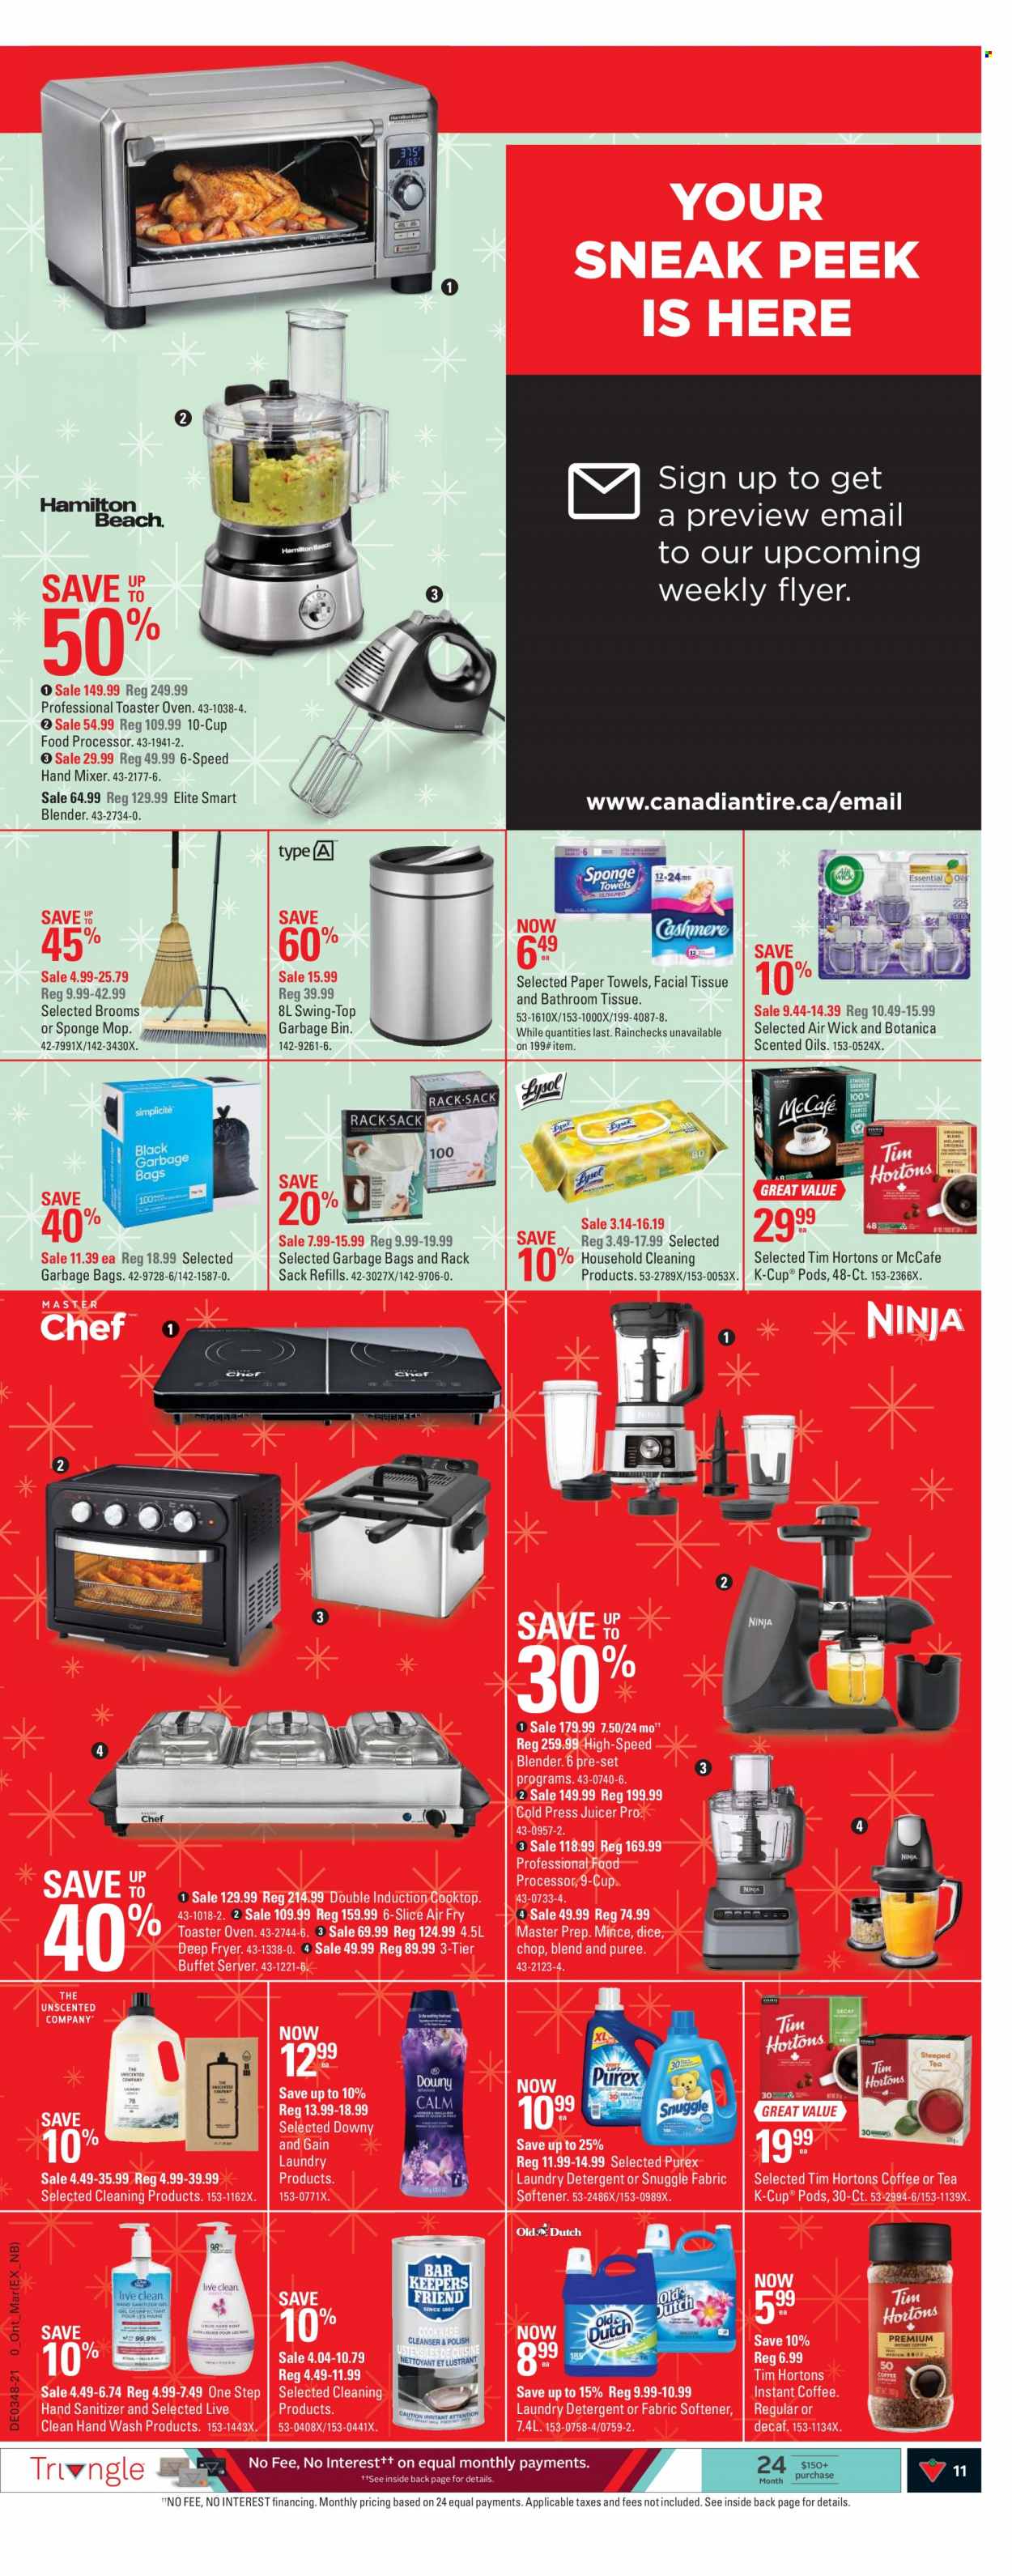 thumbnail - Canadian Tire Flyer - November 26, 2021 - December 02, 2021 - Sales products - bath tissue, kitchen towels, paper towels, Snuggle, fabric softener, laundry detergent, Purex, bag, mop, Air Wick, cooktop, induction cooktop, deep fryer, mixer, hand mixer, food processor, juicer, hand sanitizer, blender, detergent. Page 11.